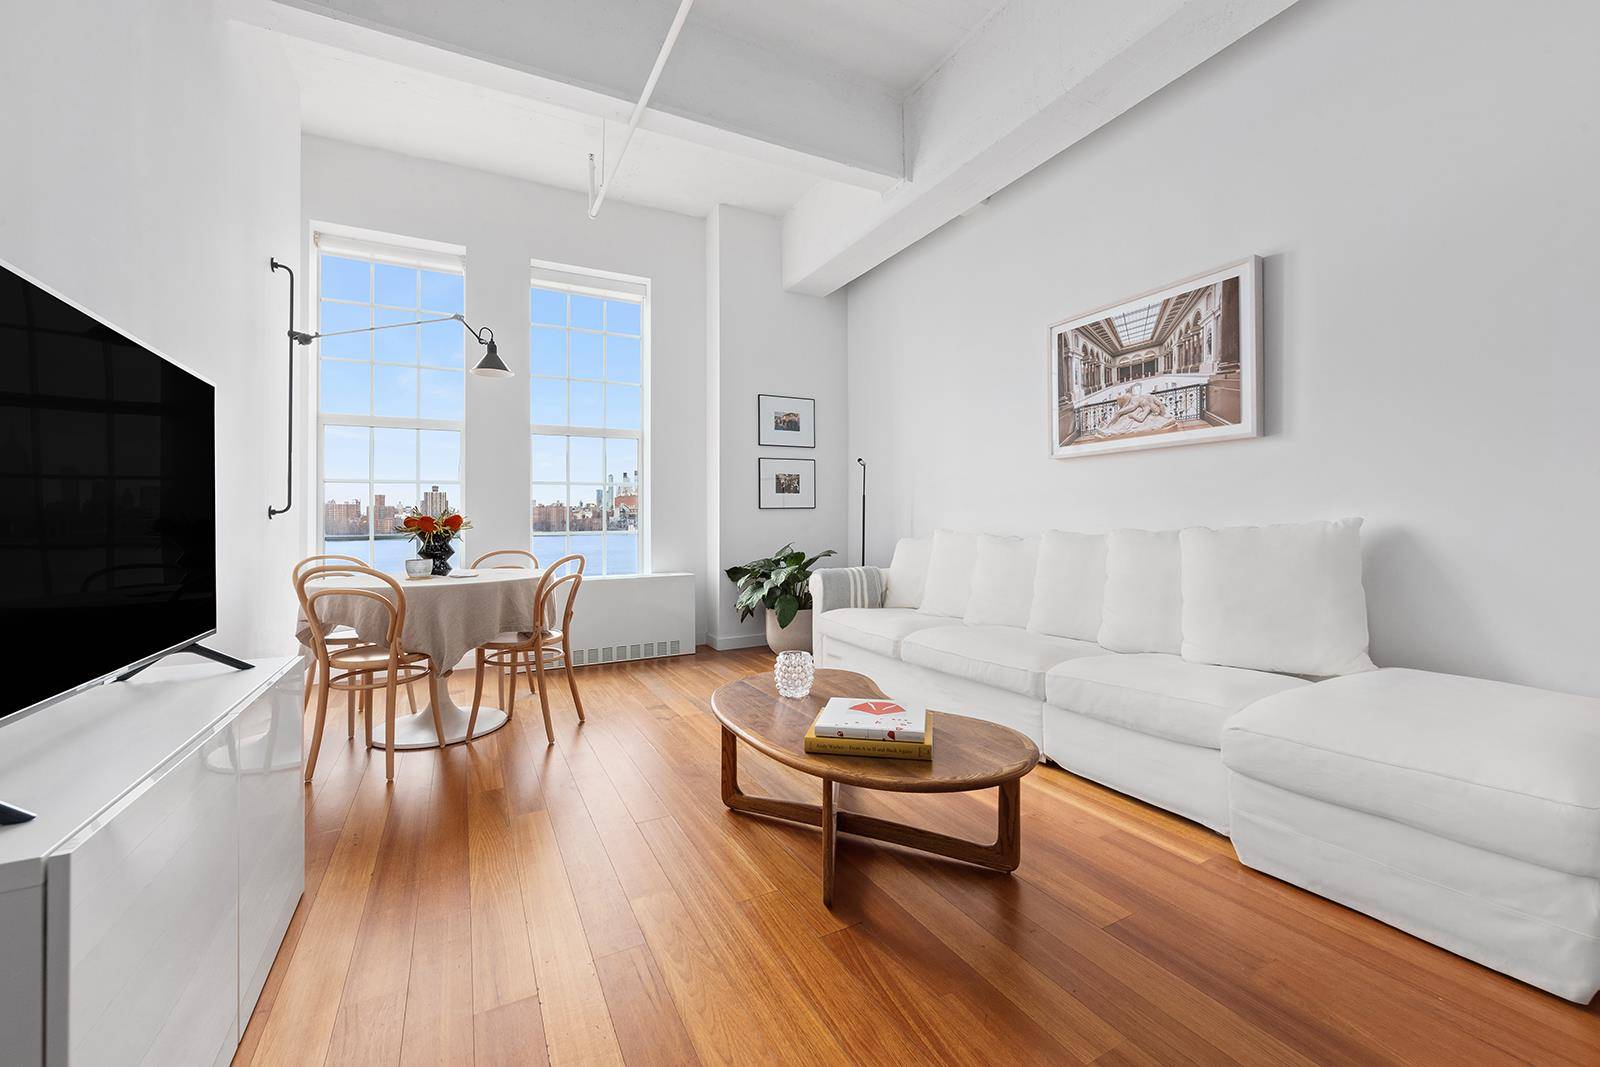 STUNNING AND OVERSIZED 1 BEDROOM WITH DIRECT WATER AND NYC VIEWS IN THE MOST COVETED BUILDING IN WILLIAMSBURG.